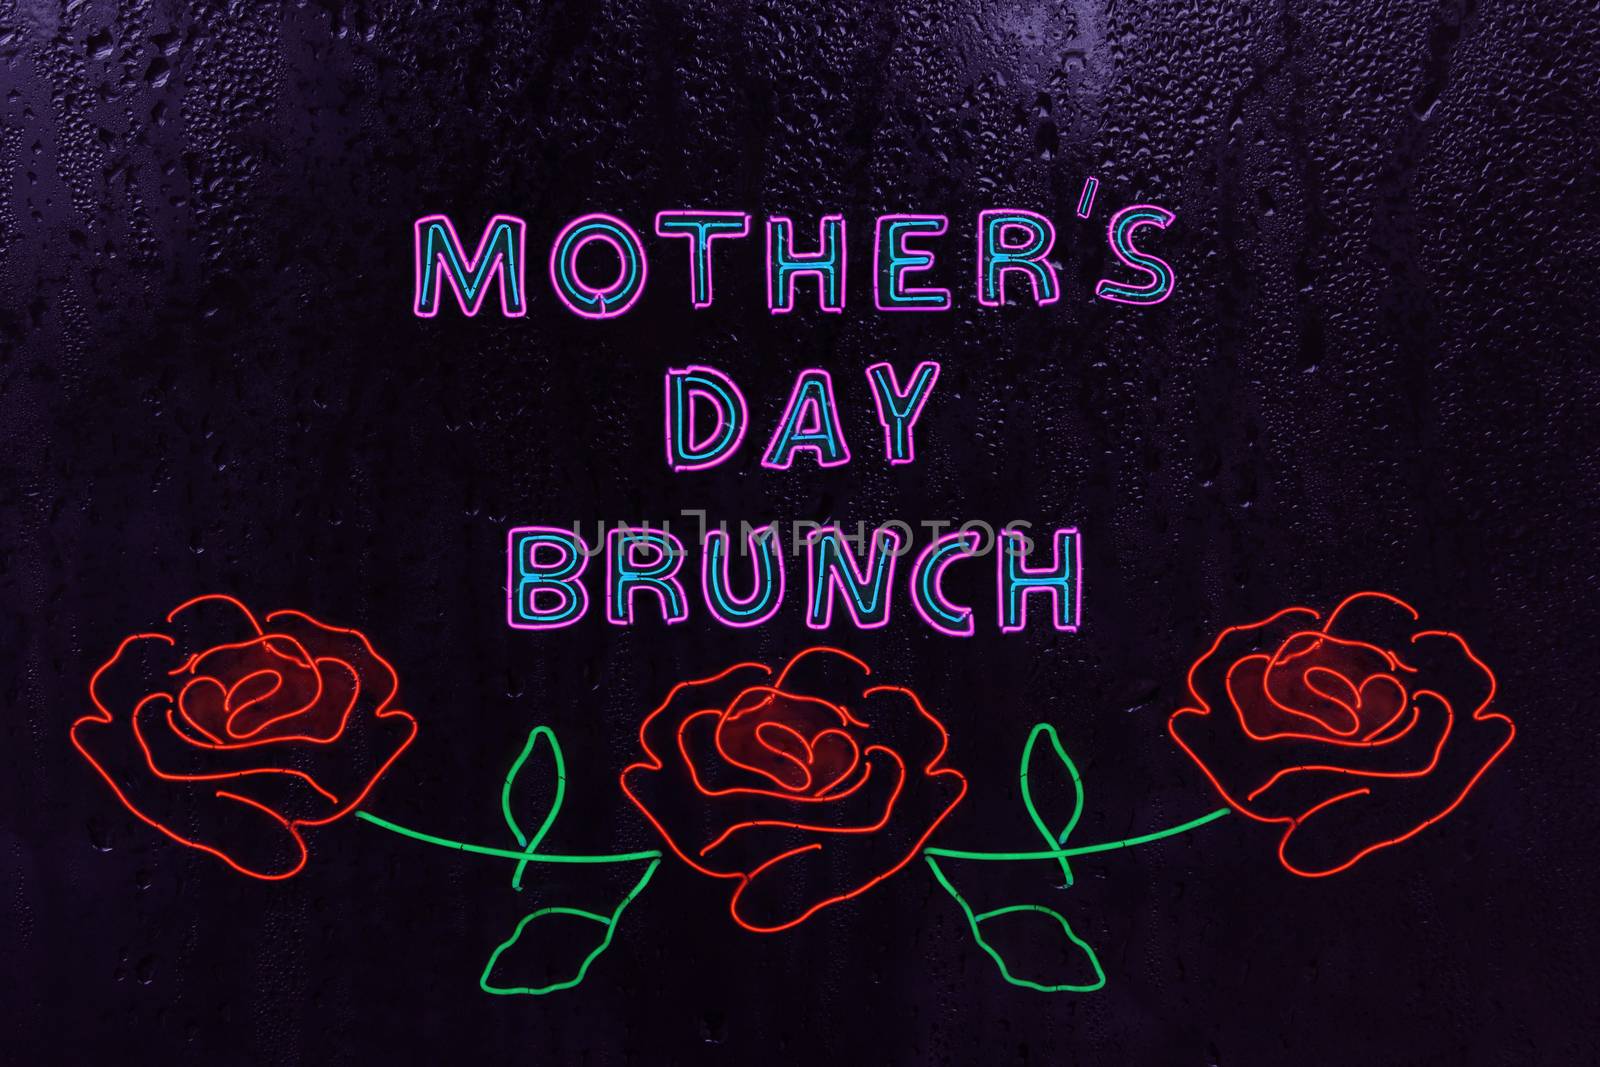 Neon Mother's Day Brunch Sign by Marti157900